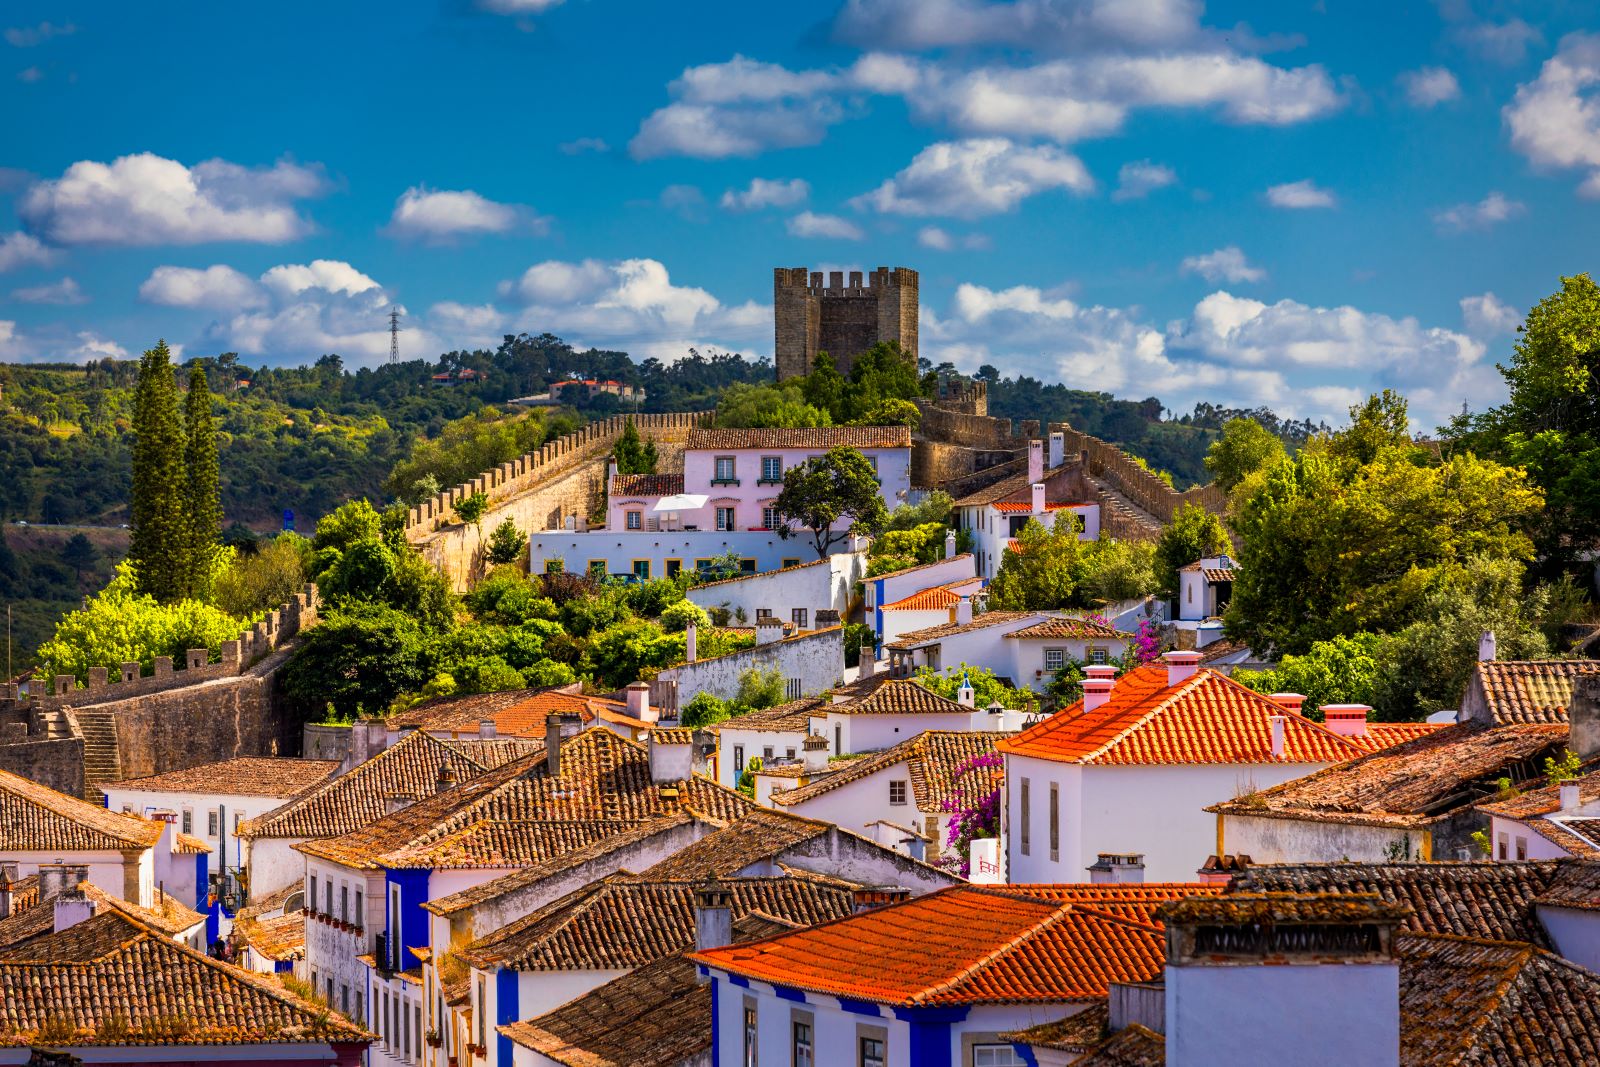 Image Credit: Shutterstock / DaLiu <p>British tourists flock to the Algarve, but locals are increasingly frustrated with the rowdiness and lack of respect for local traditions. Portugal’s leniency with post-Brexit travel might be wearing thin due to these ongoing issues.</p>